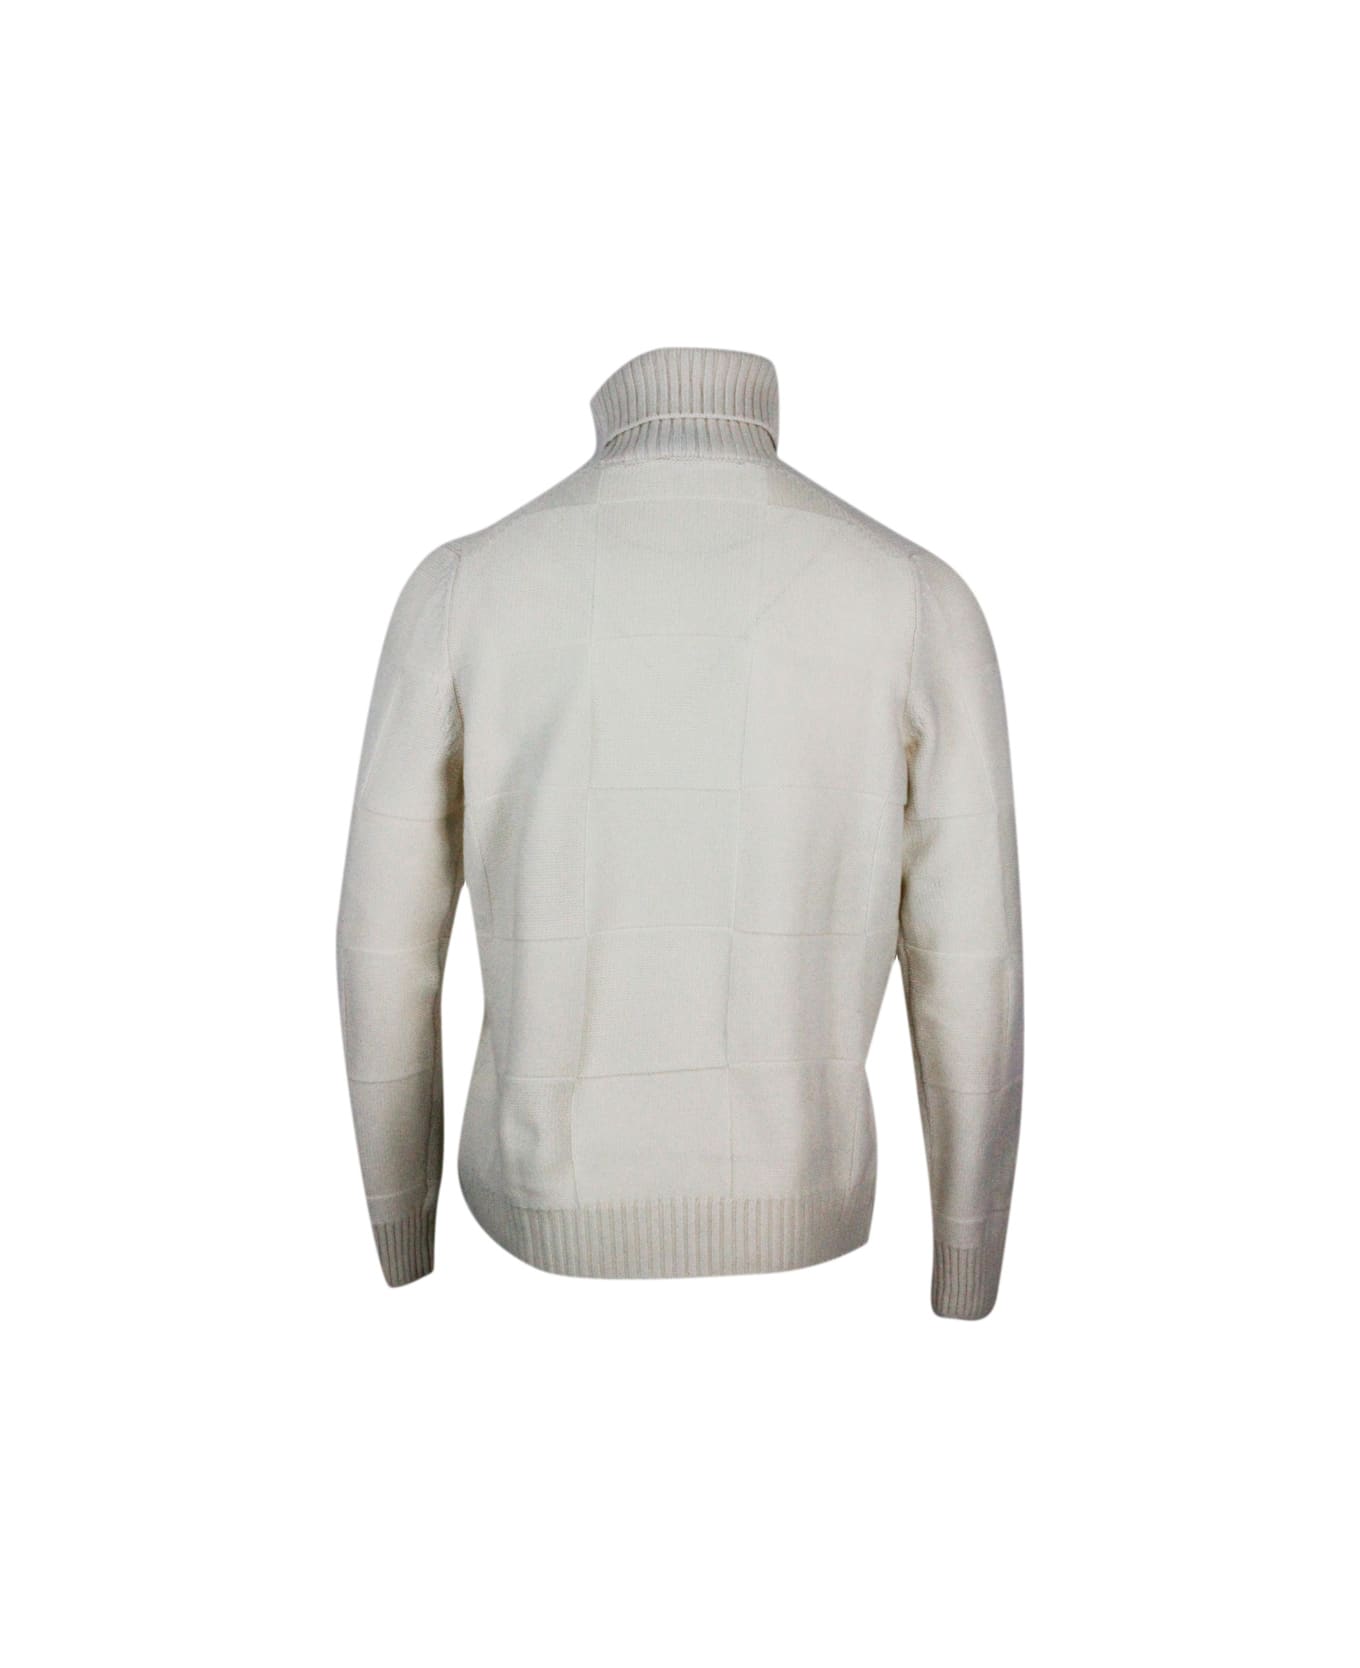 Barba Napoli Turtleneck Sweater In Pure And Soft Cashmere With Alternating Embossed Squares - White